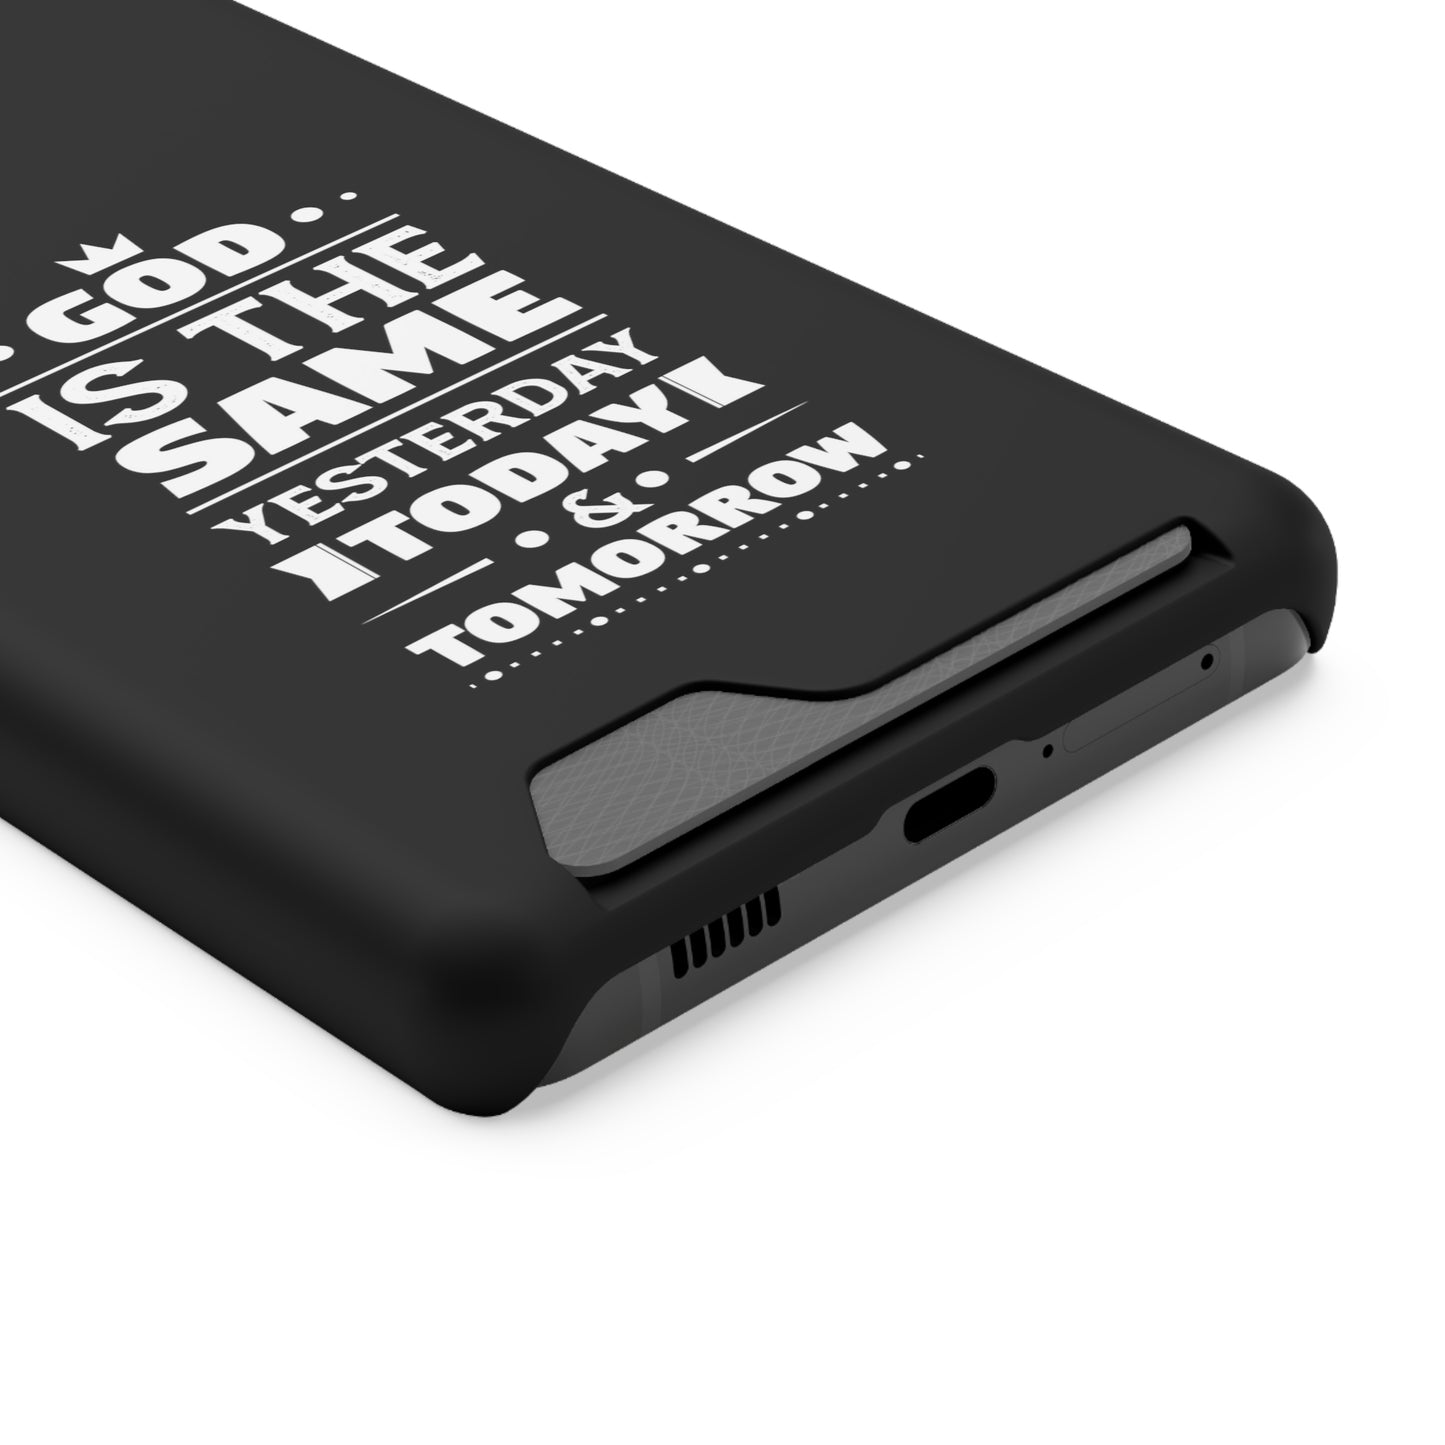 God Is The Same Yesterday Today Tomorrow Phone Case With Card Holder